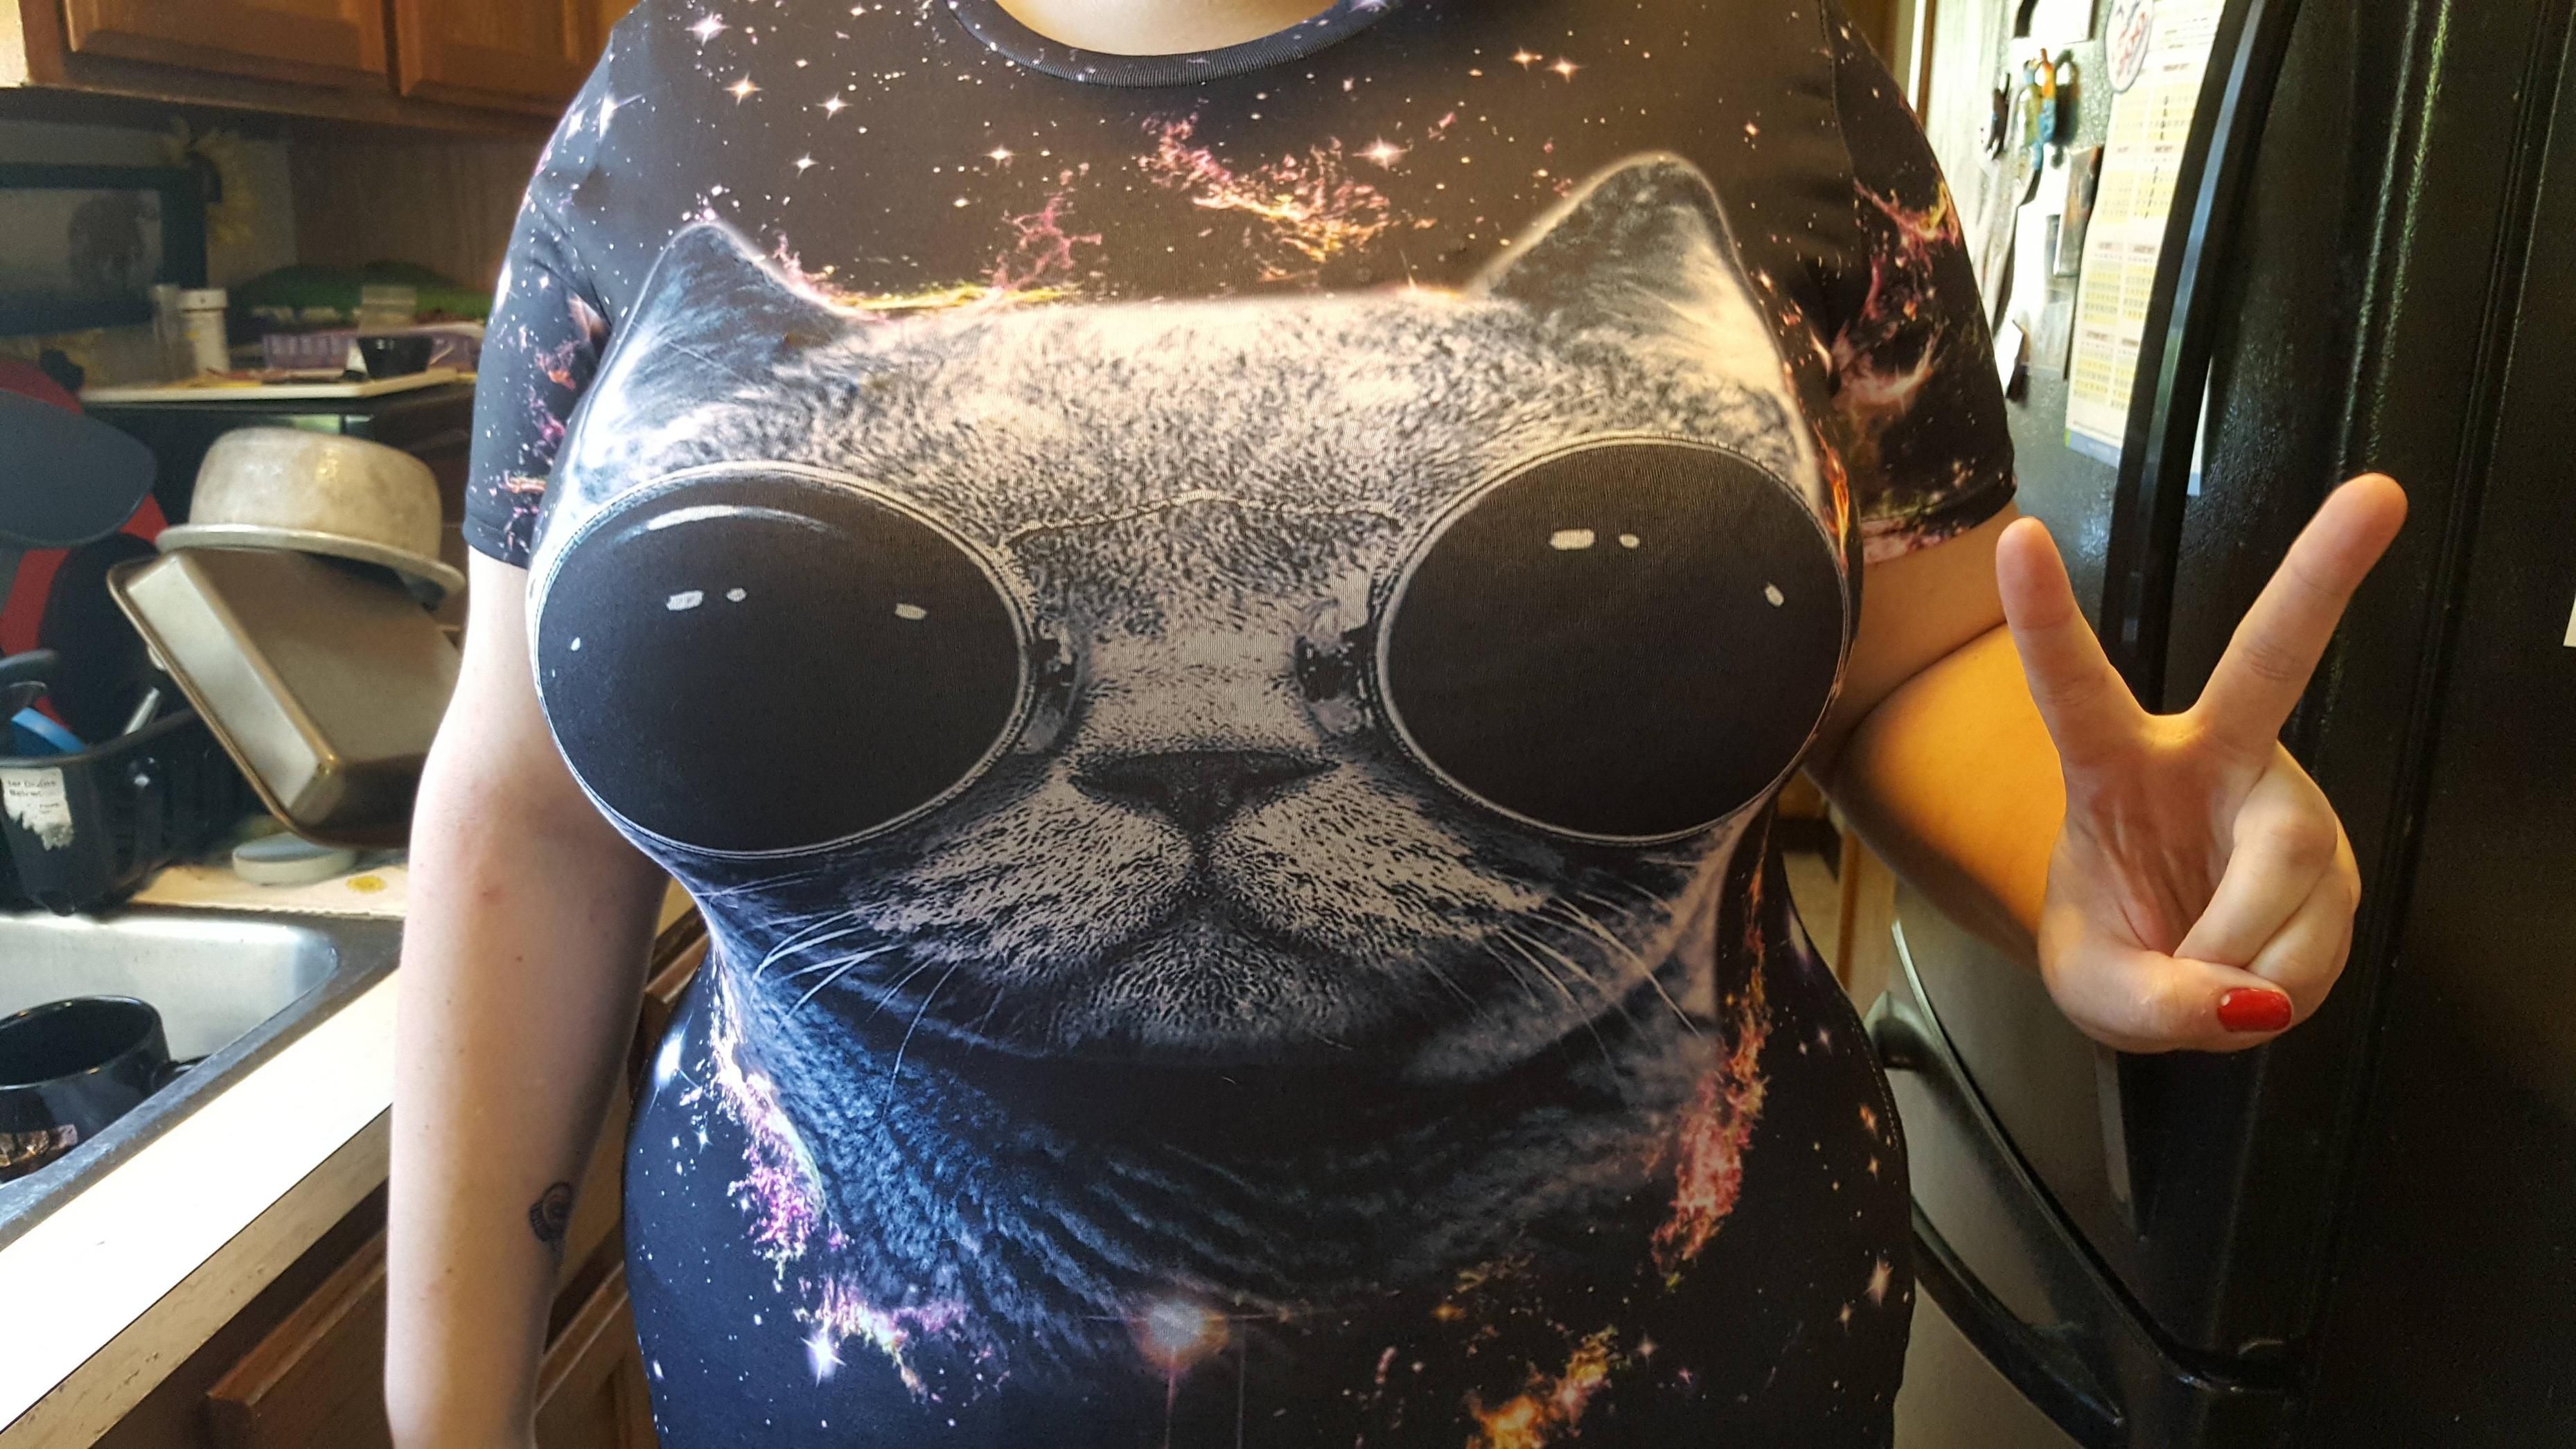 Blessedly breasted friend was excited about her new cat shirt until she realized how googly eyed she made the cat look.